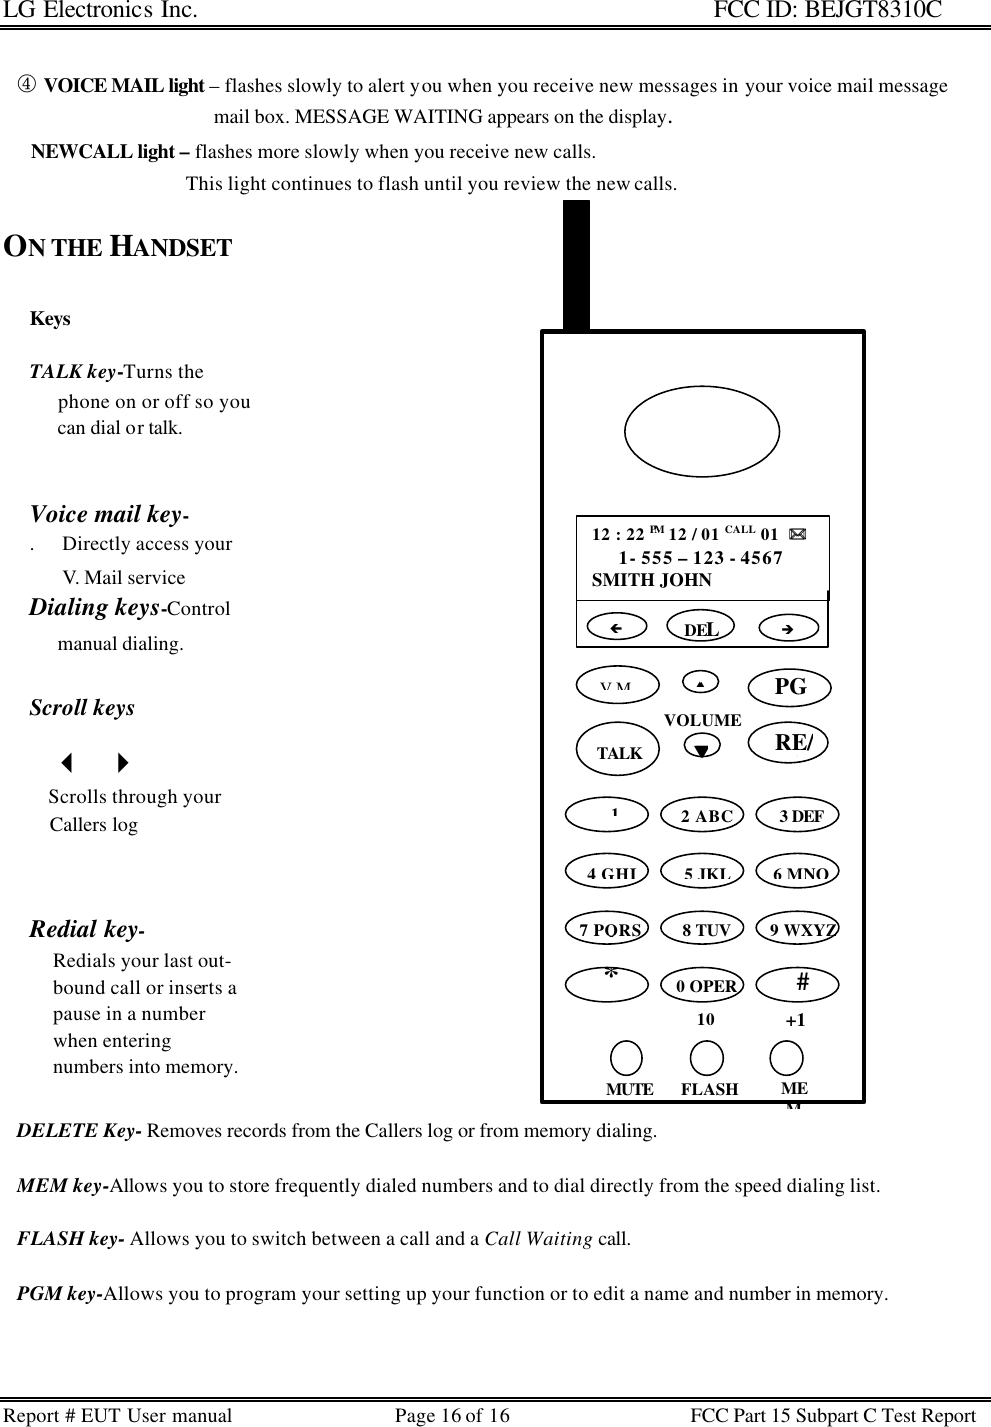 LG Electronics Inc.                                                                                                   FCC ID: BEJGT8310C Report # EUT User manual Page 16 of 16 FCC Part 15 Subpart C Test Report  Keys  TALK key-Turns the        phone on or off so you        can dial or talk.   Voice mail key-  .      Directly access your         V. Mail service Dialing keys-Control       manual dialing.  Scroll keys        3   4     Scrolls through your     Callers log     Redial key-      Redials your last out-      bound call or inserts a      pause in a number      when entering      numbers into memory.      ¯ VOICE MAIL light – flashes slowly to alert you when you receive new messages in your voice mail message                                              mail box. MESSAGE WAITING appears on the display.       NEWCALL light – flashes more slowly when you receive new calls.                                         This light continues to flash until you review the new calls.  ON THE HANDSET                                      DELETE Key- Removes records from the Callers log or from memory dialing.     MEM key-Allows you to store frequently dialed numbers and to dial directly from the speed dialing list.     FLASH key- Allows you to switch between a call and a Call Waiting call.        PGM key-Allows you to program your setting up your function or to edit a name and number in memory.   VOLUME ss 12 : 22 PM 12 / 01 CALL 01  )) 1- 555 – 123 - 4567 SMITH JOHN  DEL V.M ttTALK 2 ABC 3 DEF 4 GHI 5 JKL 6 MNO 7 PQRS 8 TUV 9 WXYZ*  0 OPER 10 #  +1 MUTE FLASH MEM èçPGM   1 RE/PA 